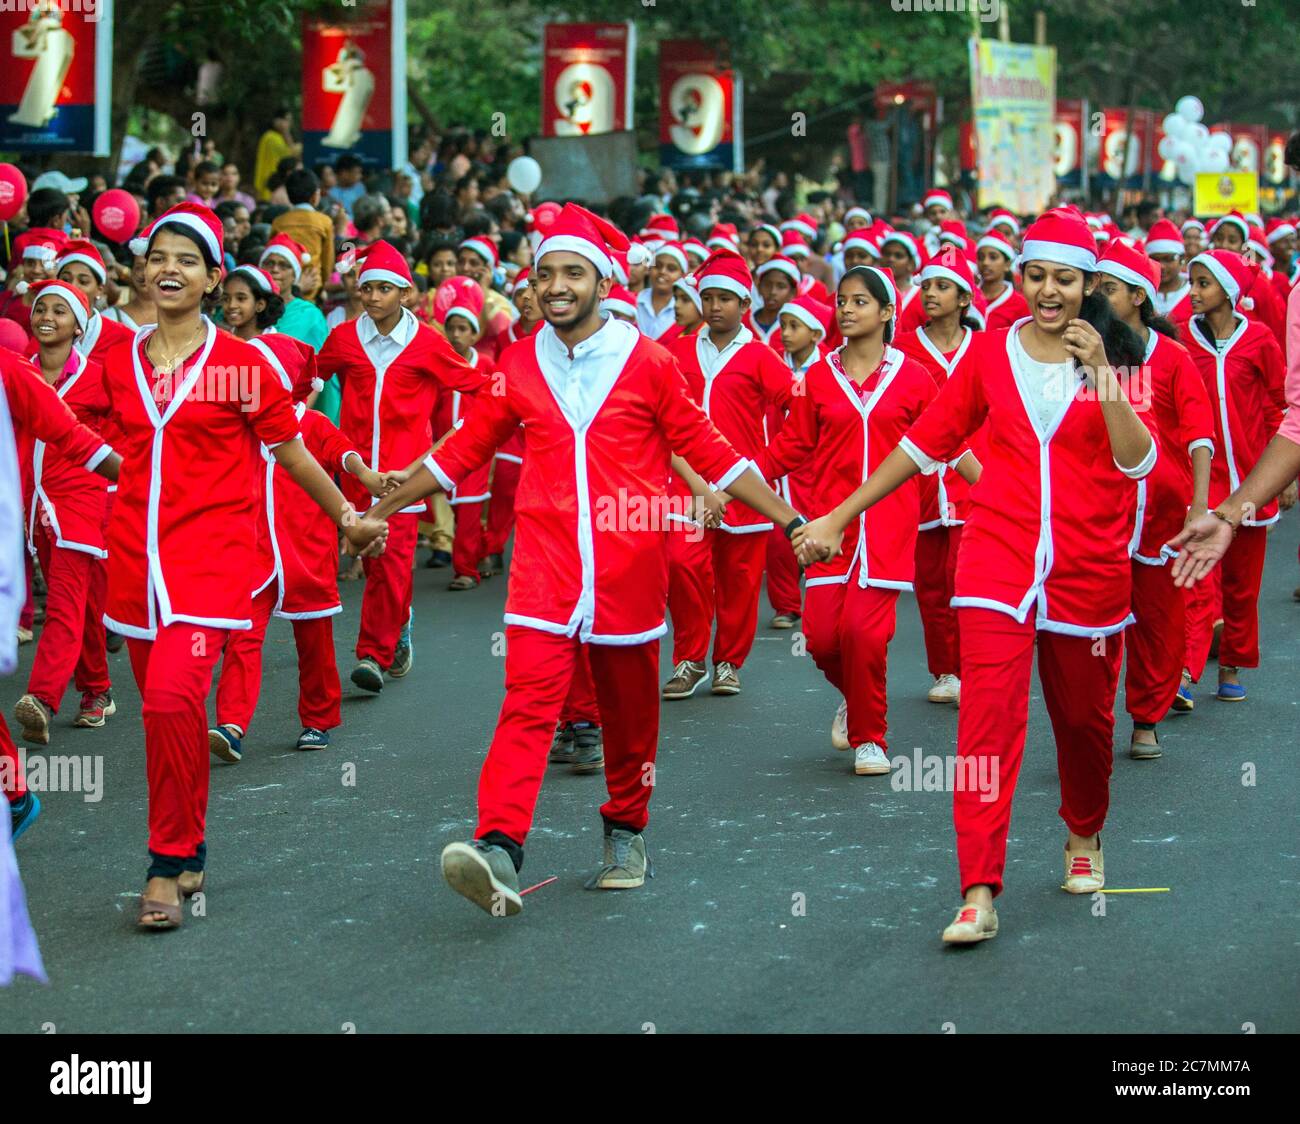 Buon Natale 2020 Trichur.Colourfully Dressed Upon Santa S Doing Flashmob From Buon Natale Christmas Fest Thrissur 2017 Thrissur Kerala India A Unique Christmas Celebration Whe Stock Photo Alamy